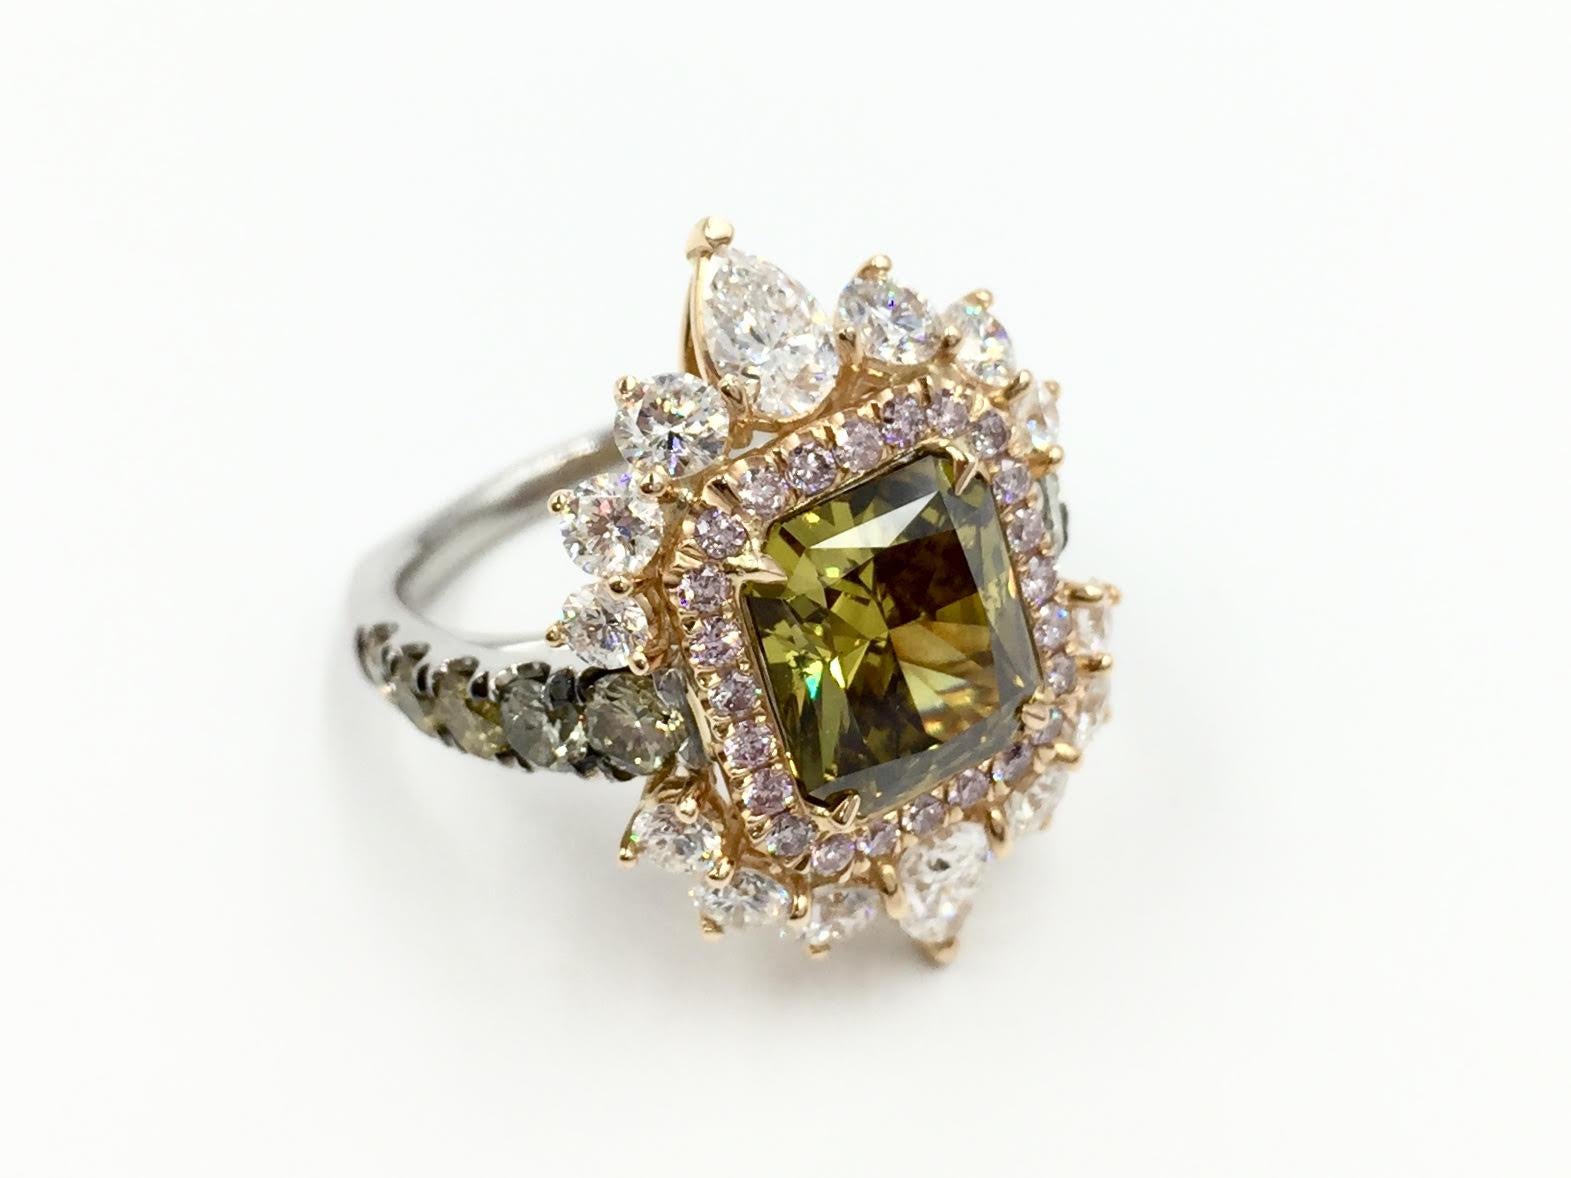 A beautifully unique platinum and 18k rose gold diamond cocktail ring. A 3.02 radiant cut G.I.A. certified Fancy Deep Brown-Greenish Yellow, SI2 diamond is set with a halo made of 18k rose gold and .28 carats of pink diamonds. The halo is surrounded